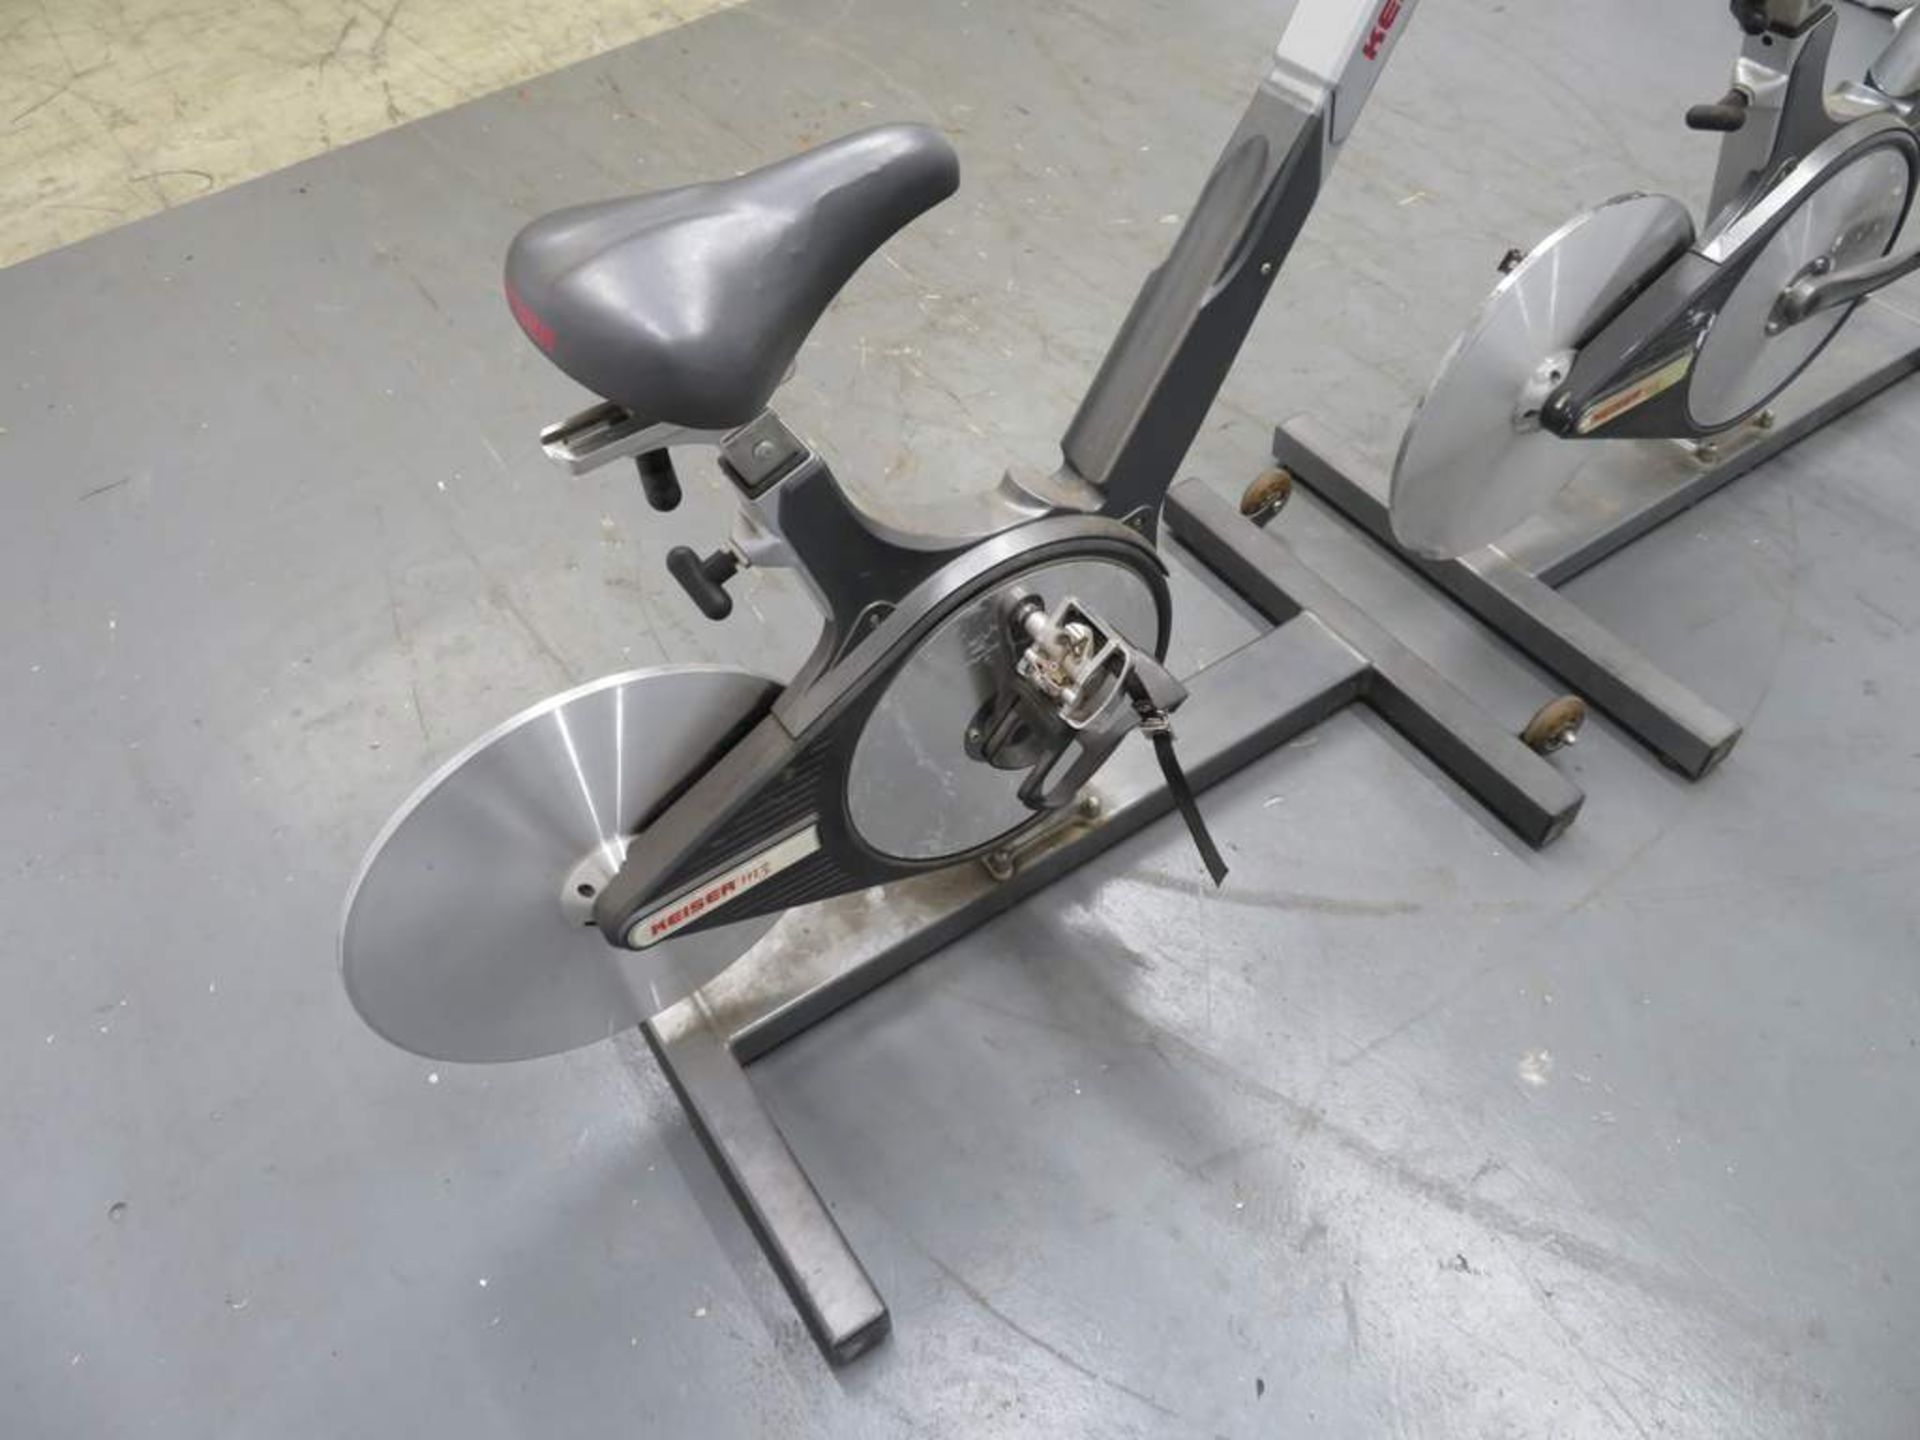 2x Keiser M3 Spinning Bike, Complete With Digital Console (damaged) & Adjustable Seat. - Image 10 of 10